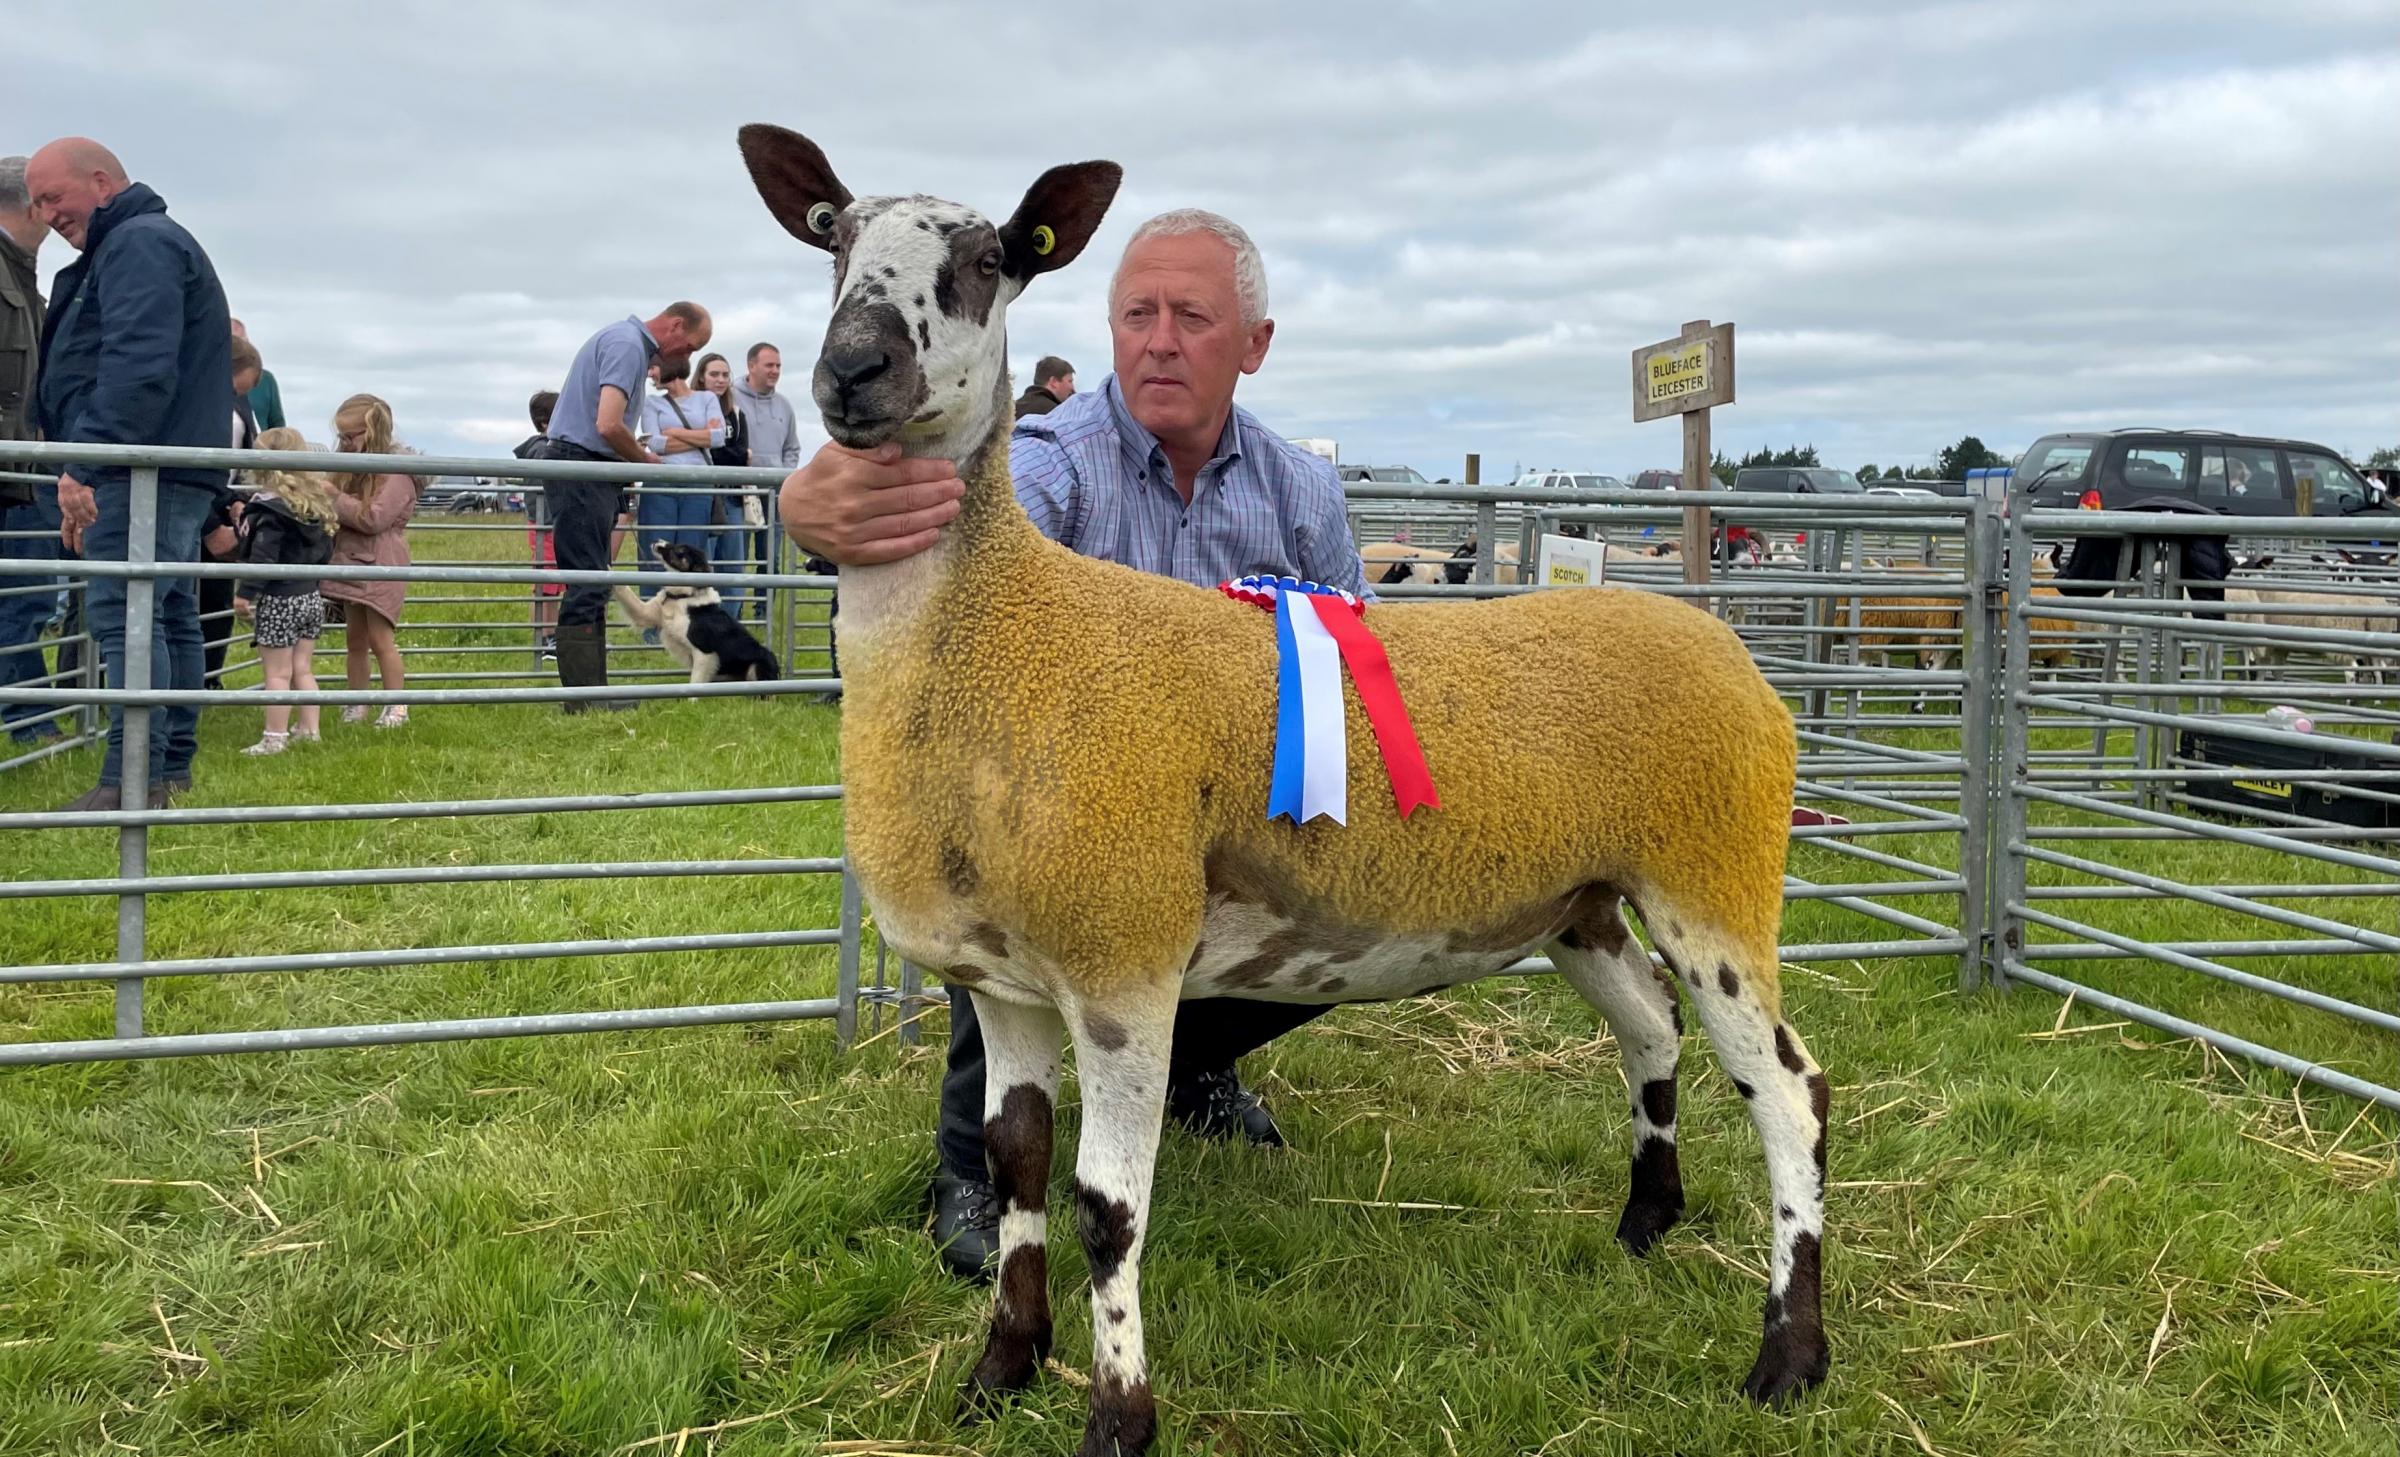 Champion among the Bluefaced Leicester section was this gimmer from RD McInnes 